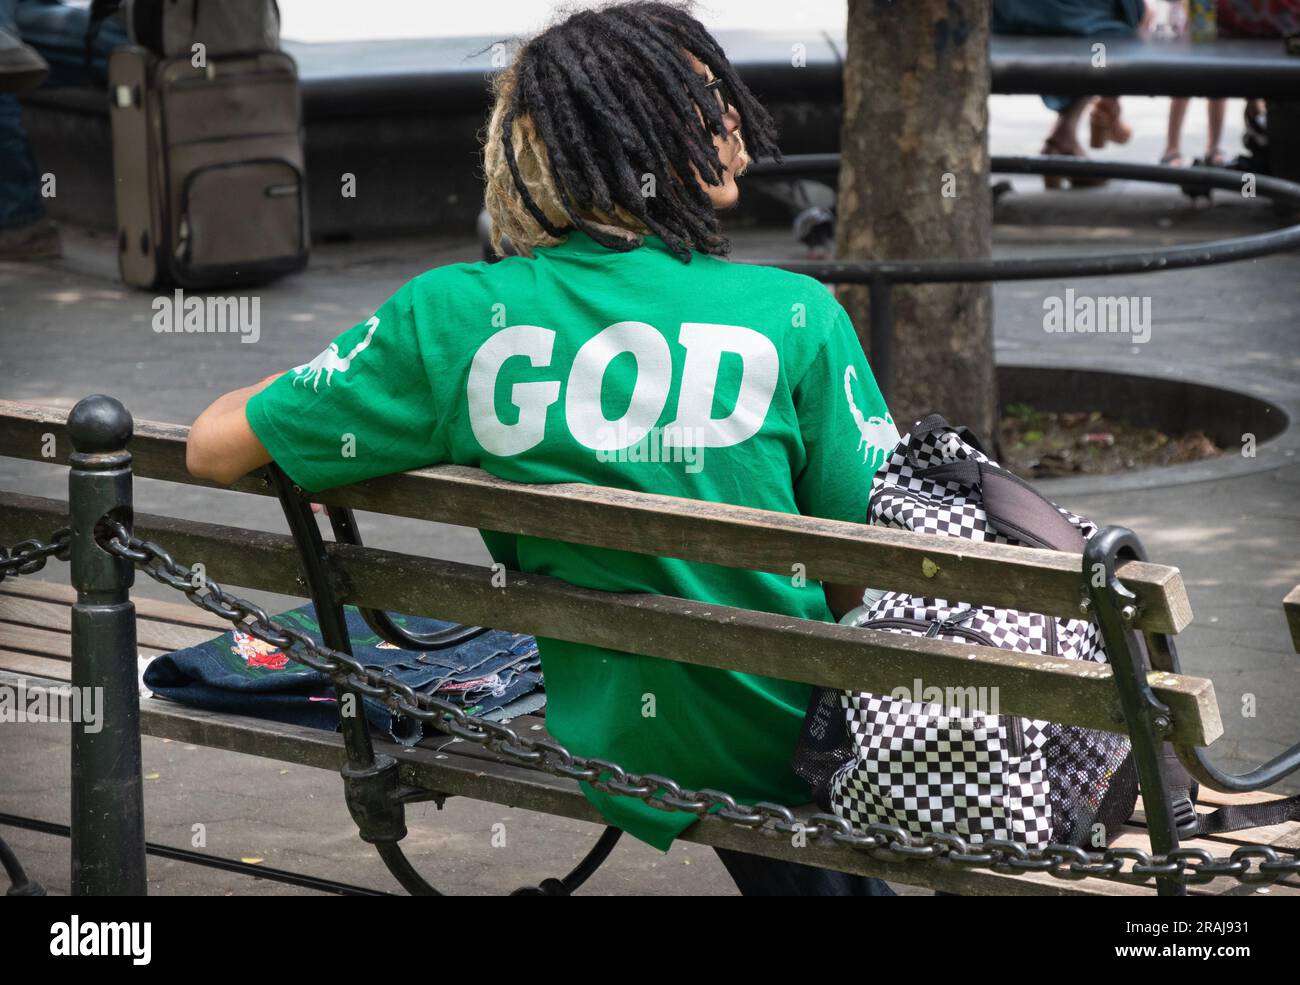 A young man who seems to think he is God. In a park in Greenwich Village, Manhattan. Stock Photo